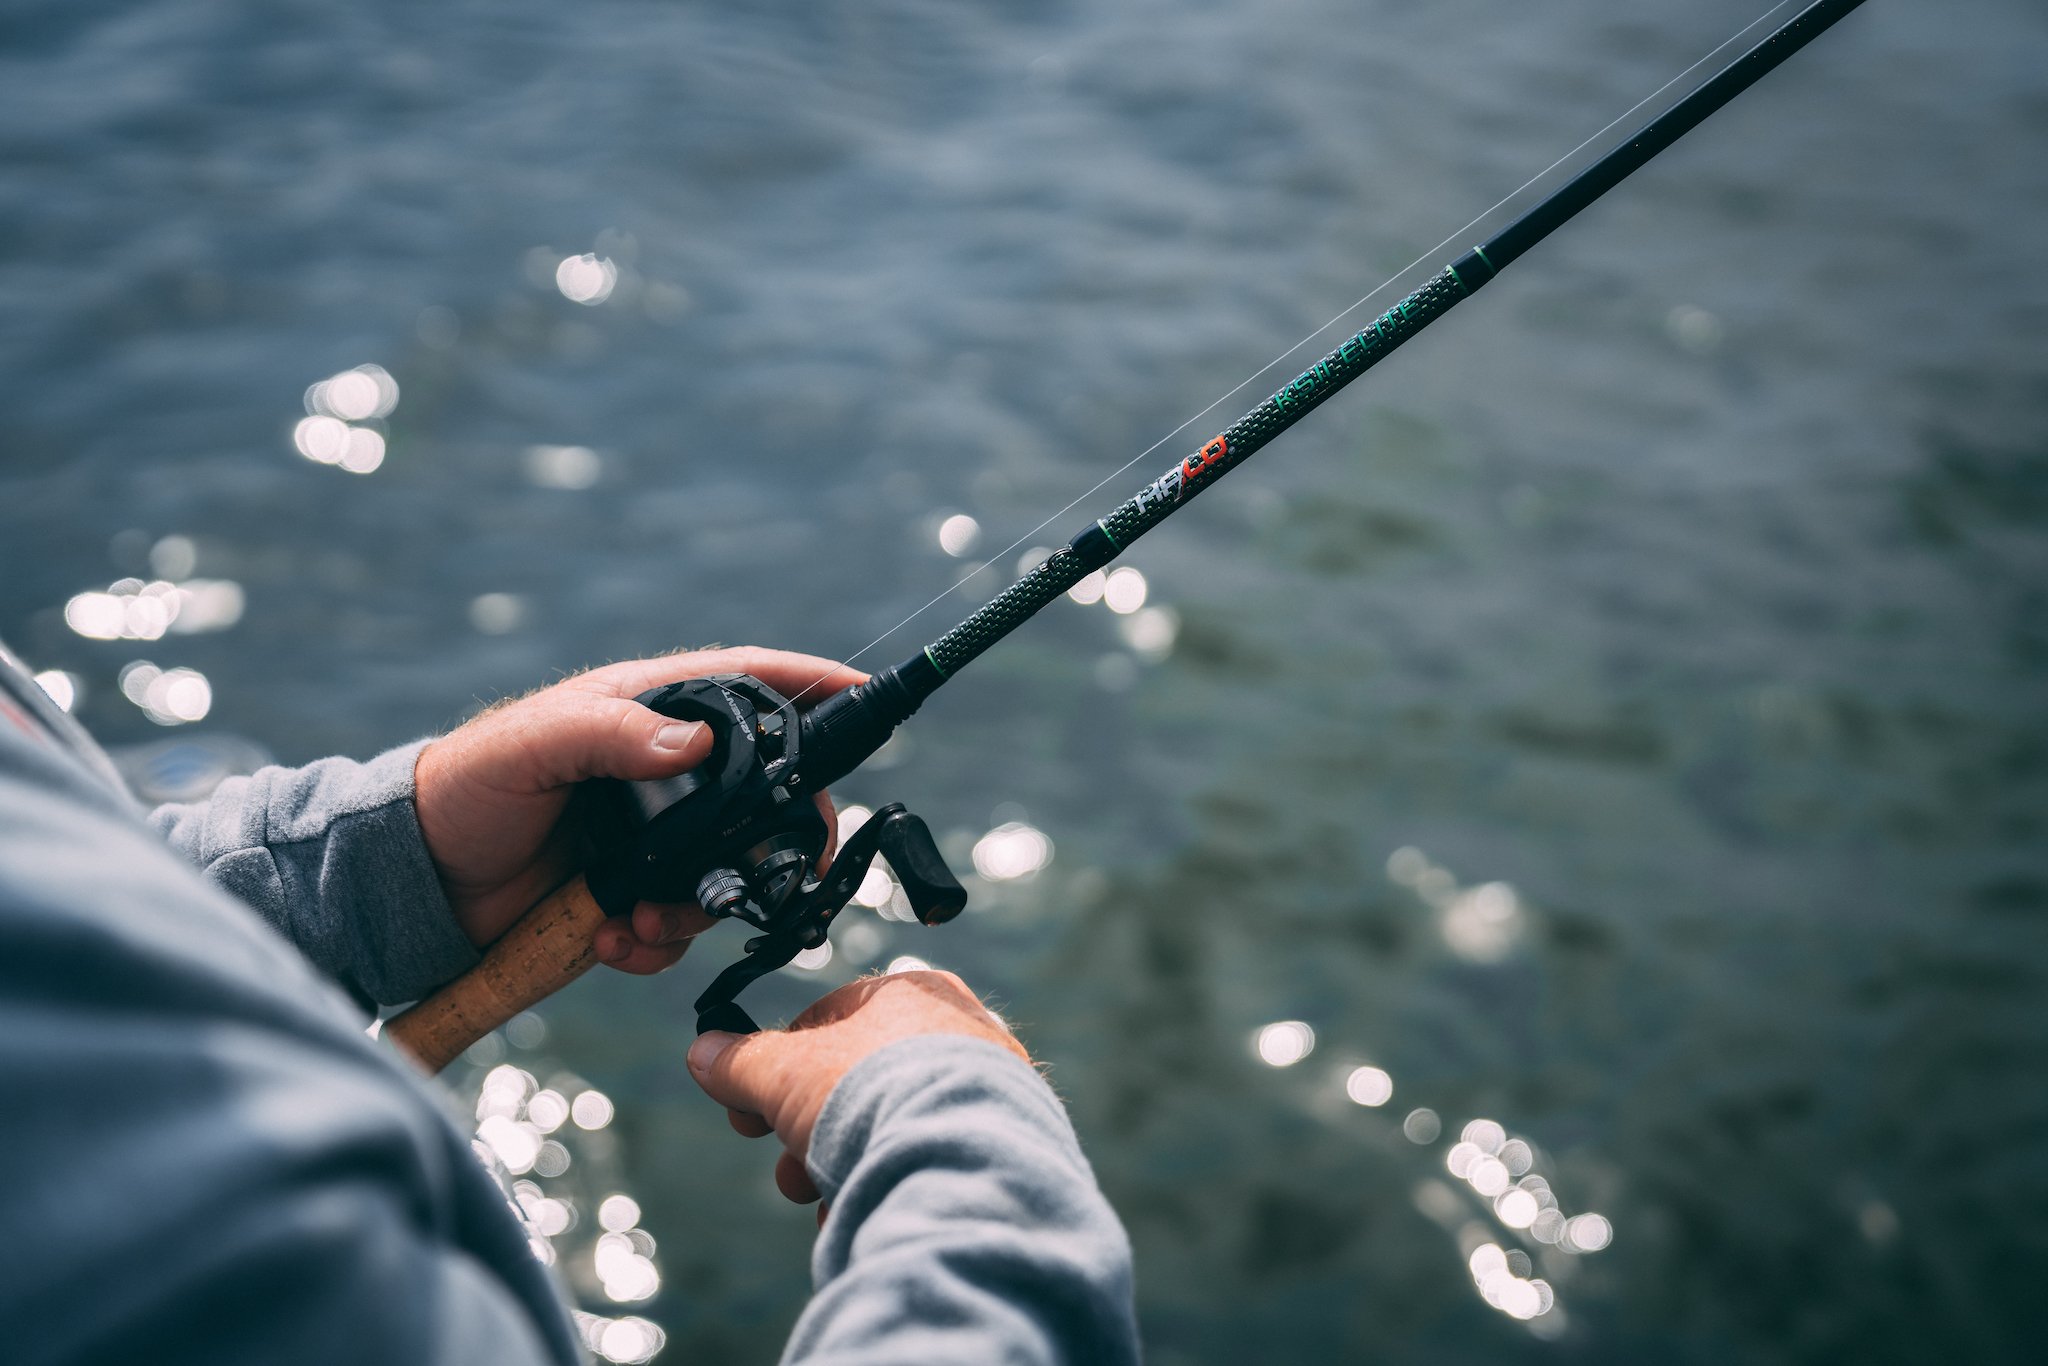 You'll Feel More Bites with Halo's New Super-Sensitive, Upscaled KS II  Elite Series Fishing Rods – Anglers Channel